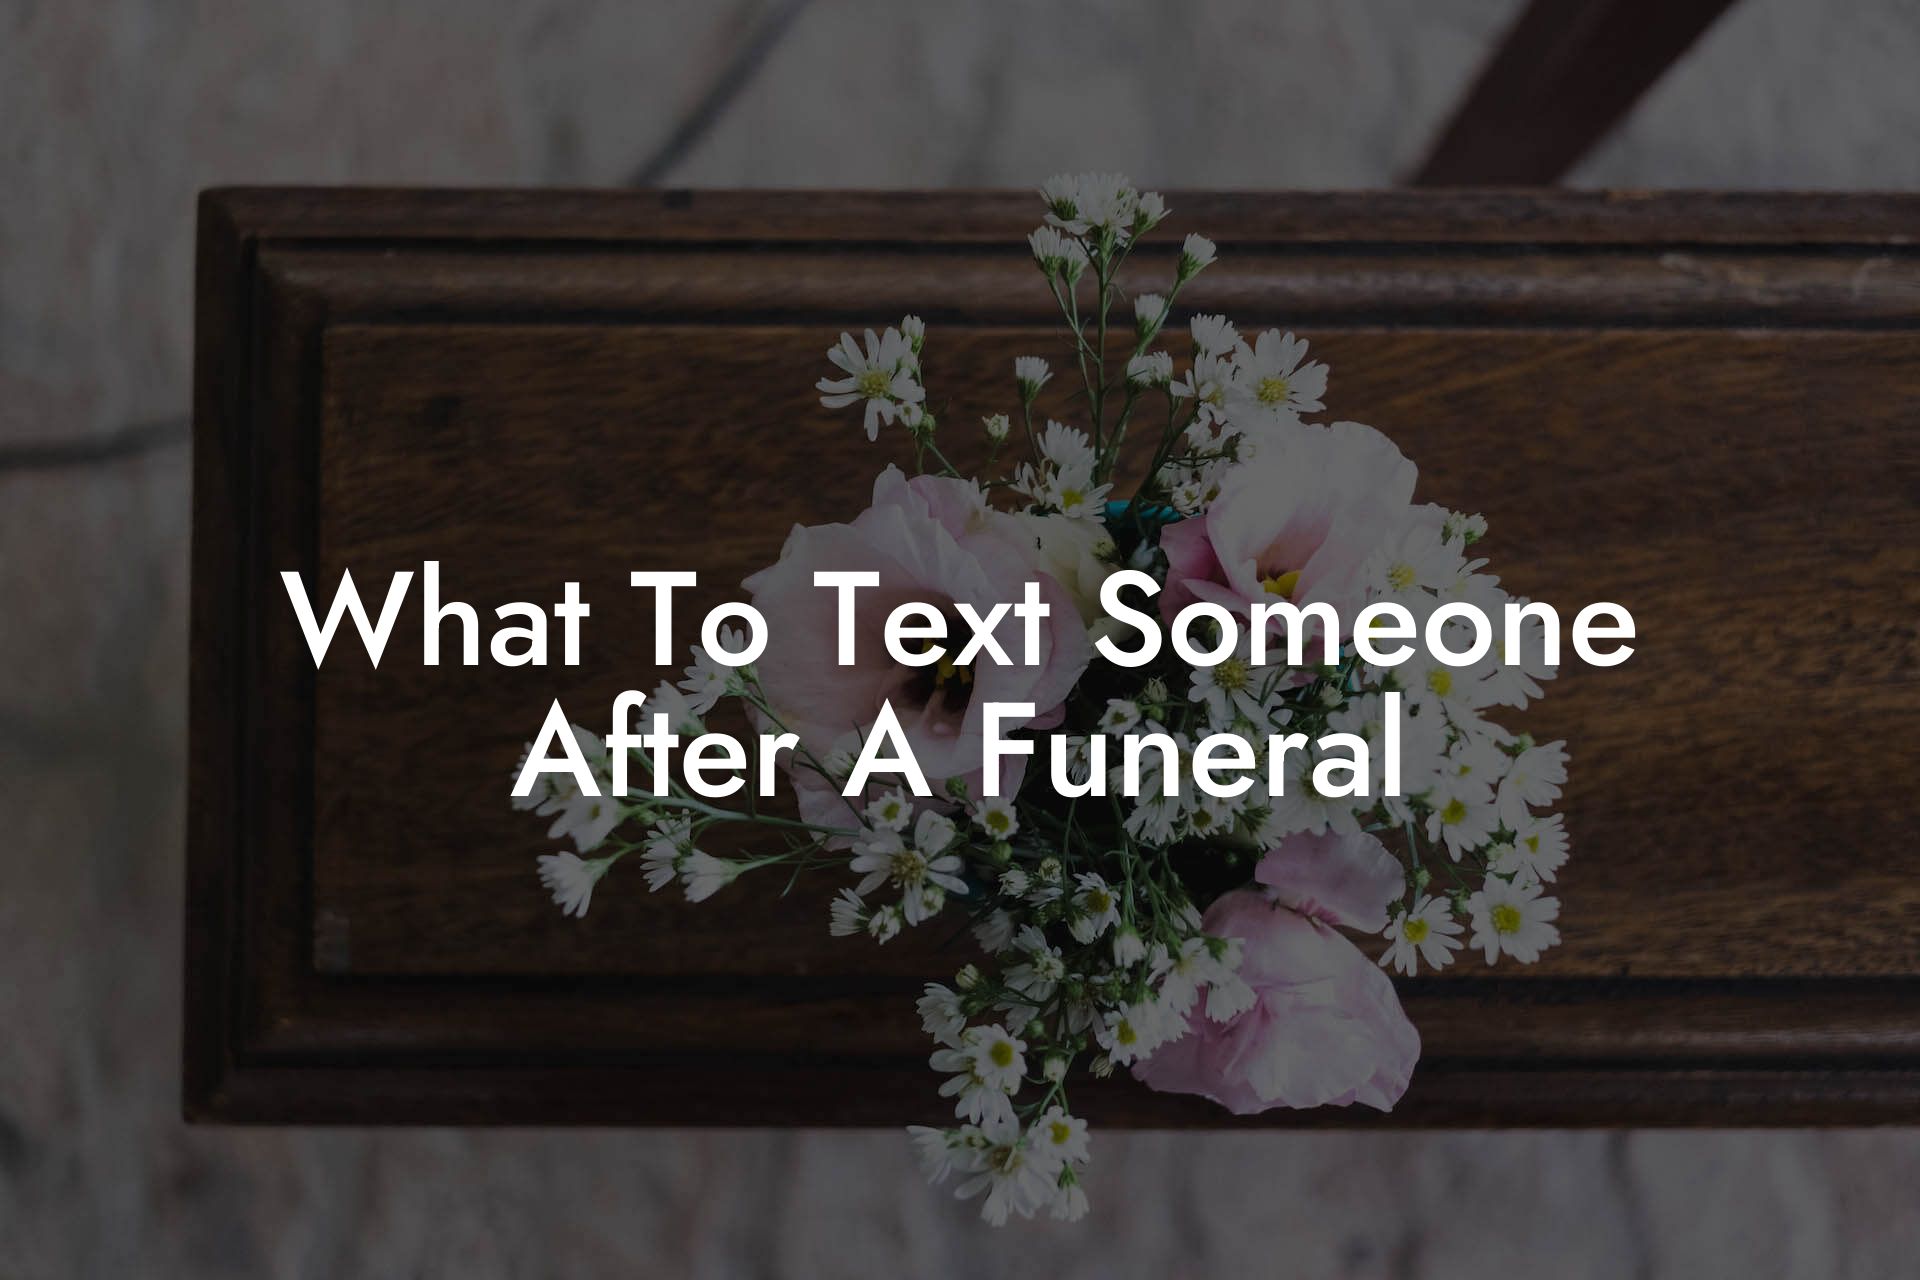 What To Text Someone After A Funeral